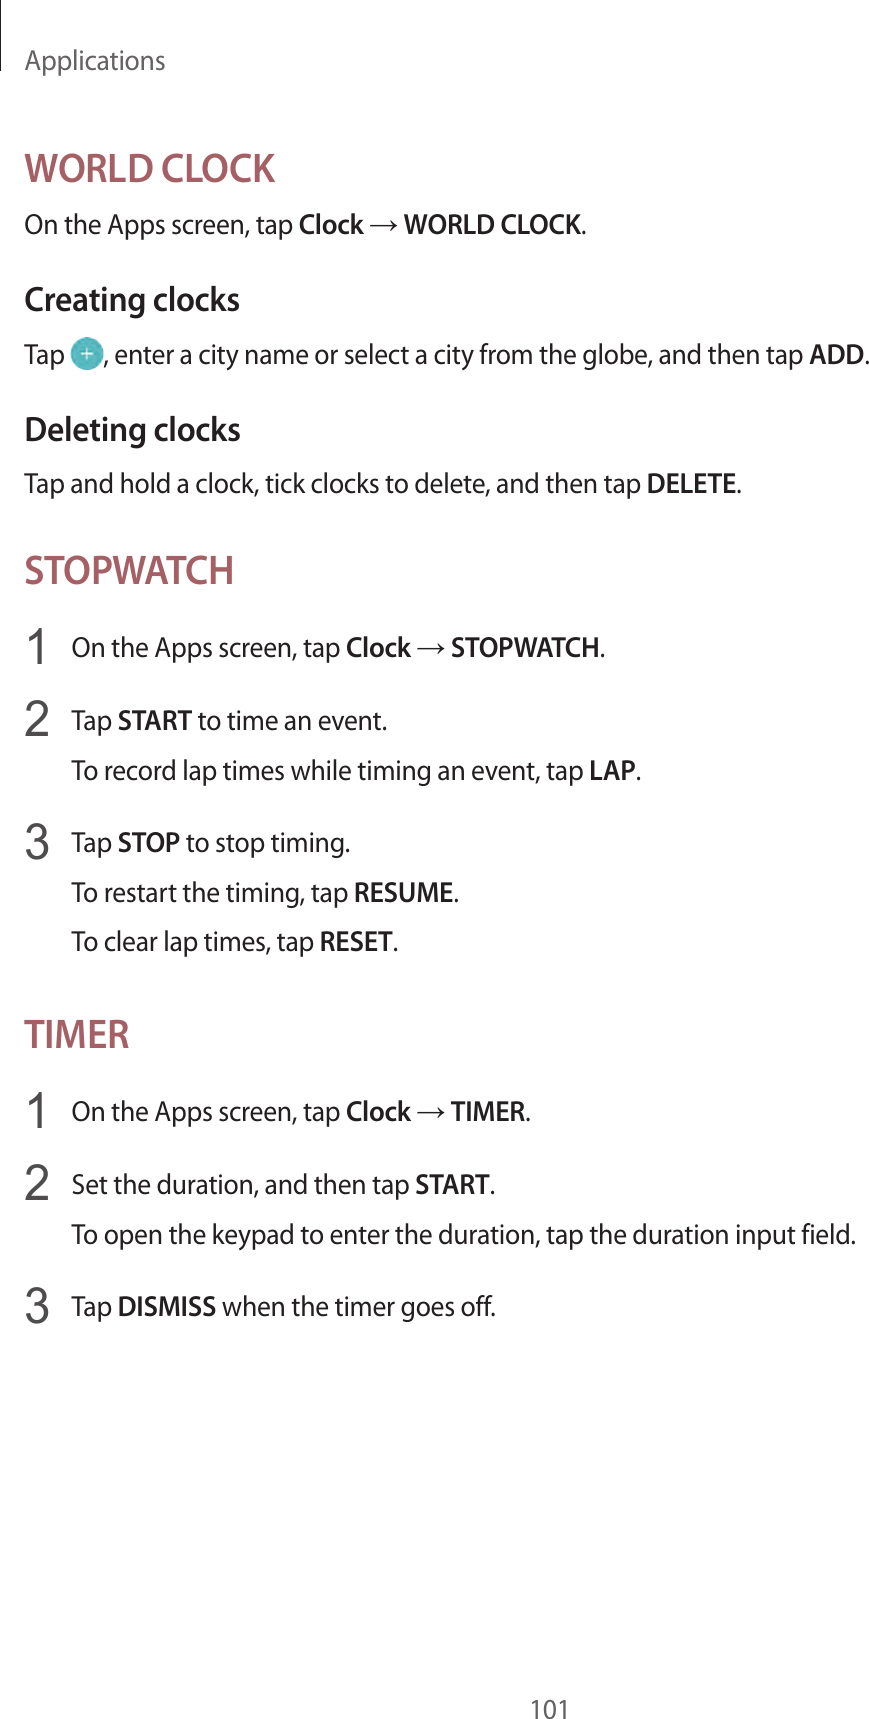 Applications101WORLD CLOCKOn the Apps screen, tap Clock → WORLD CLOCK.Creating clocksTap  , enter a city name or select a city from the globe, and then tap ADD.Deleting clocksTap and hold a clock, tick clocks to delete, and then tap DELETE.STOPWATCH1  On the Apps screen, tap Clock → STOPWATCH.2  Tap START to time an event.To record lap times while timing an event, tap LAP.3  Tap STOP to stop timing.To restart the timing, tap RESUME.To clear lap times, tap RESET.TIMER1  On the Apps screen, tap Clock → TIMER.2  Set the duration, and then tap START.To open the keypad to enter the duration, tap the duration input field.3  Tap DISMISS when the timer goes off.